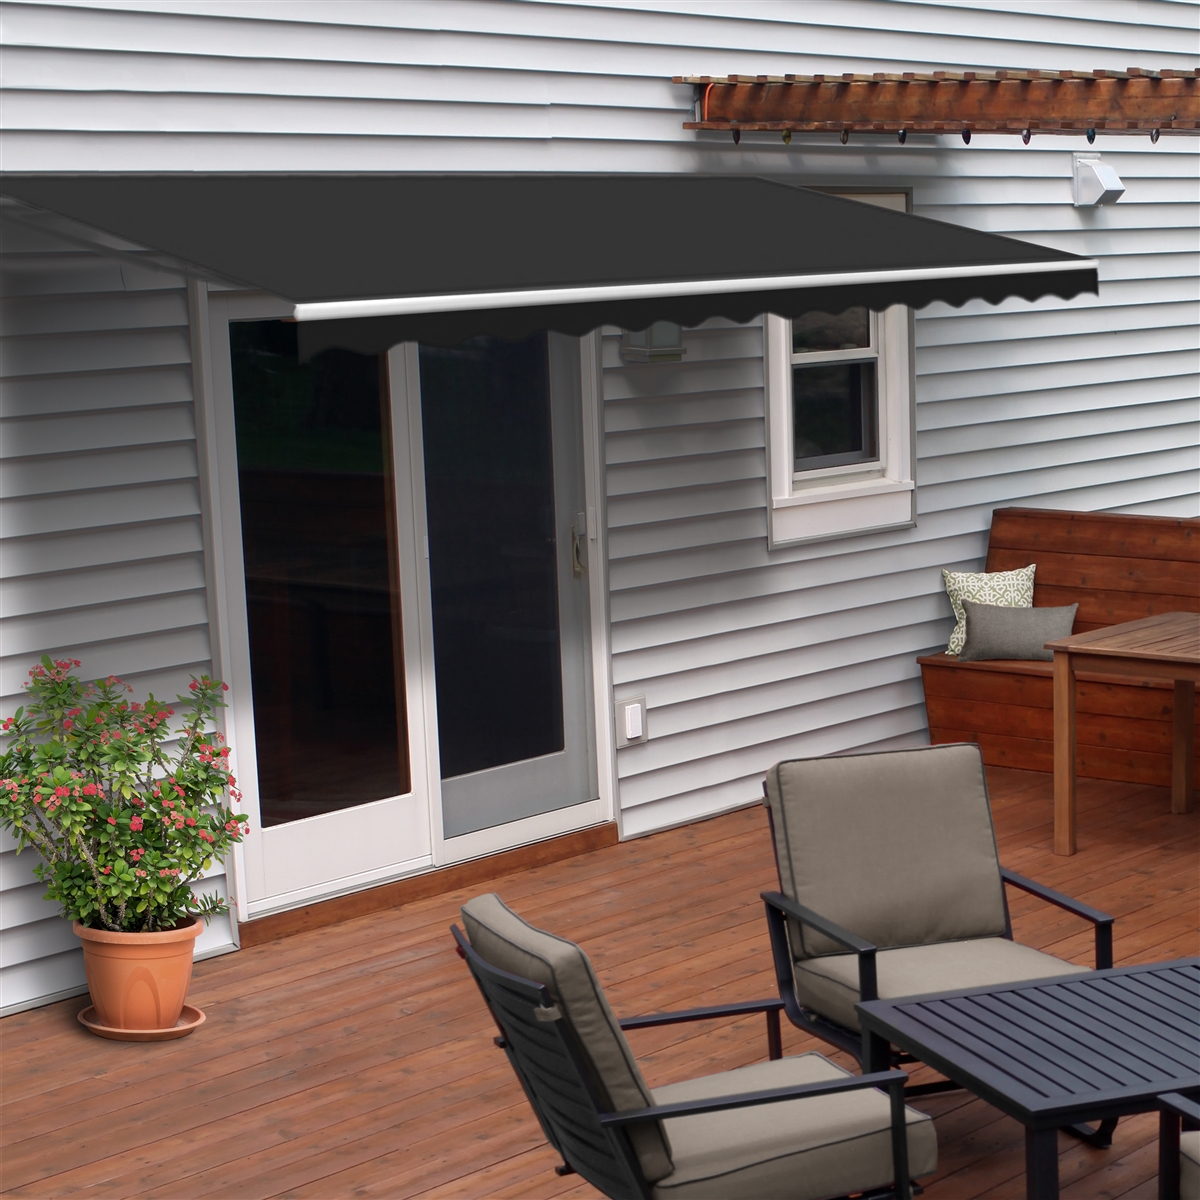 Motorized Retractable Patio Awning 10x8 Feet - Black - ALE